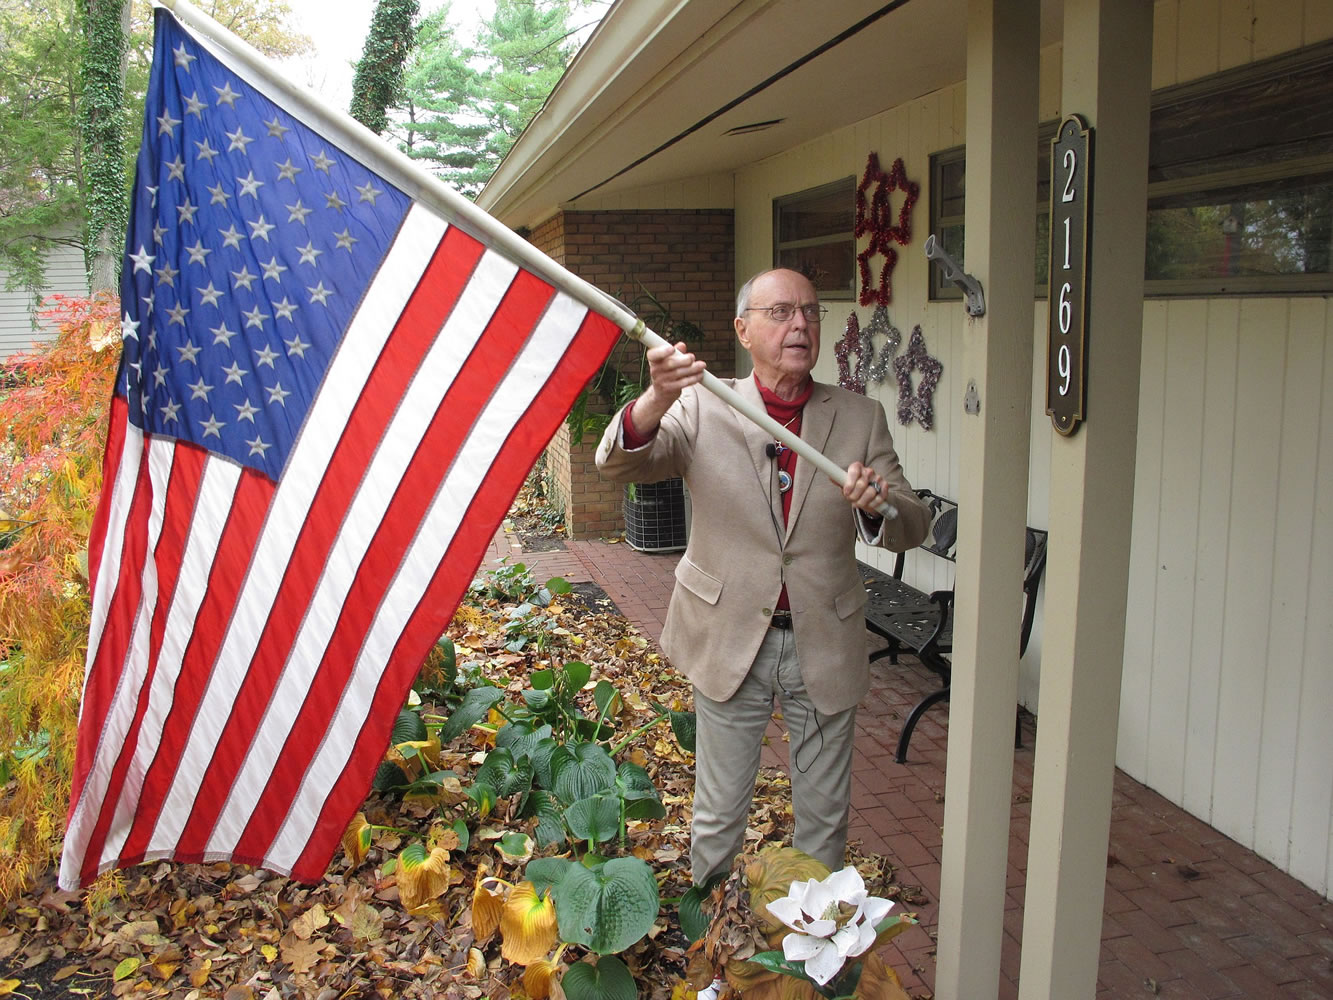 Rupert &quot;Twink&quot; Starr adjusts a flag last month at his house in Upper Arlington, Ohio.